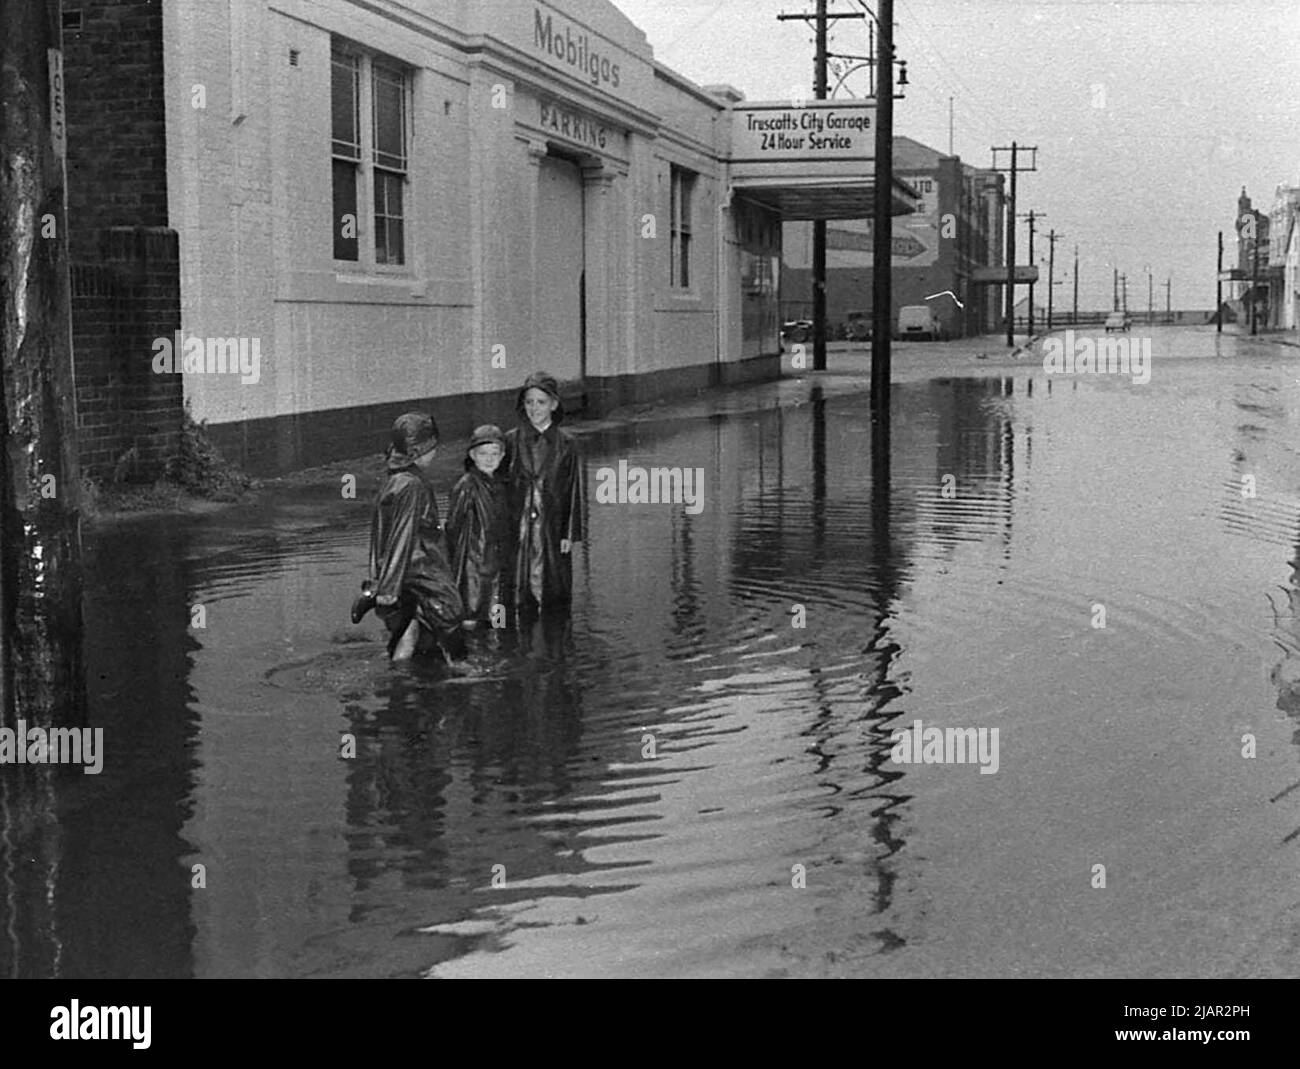 Children walking in flooded streets in front of a Mobilgas station in Australia ca. 1956 Stock Photo